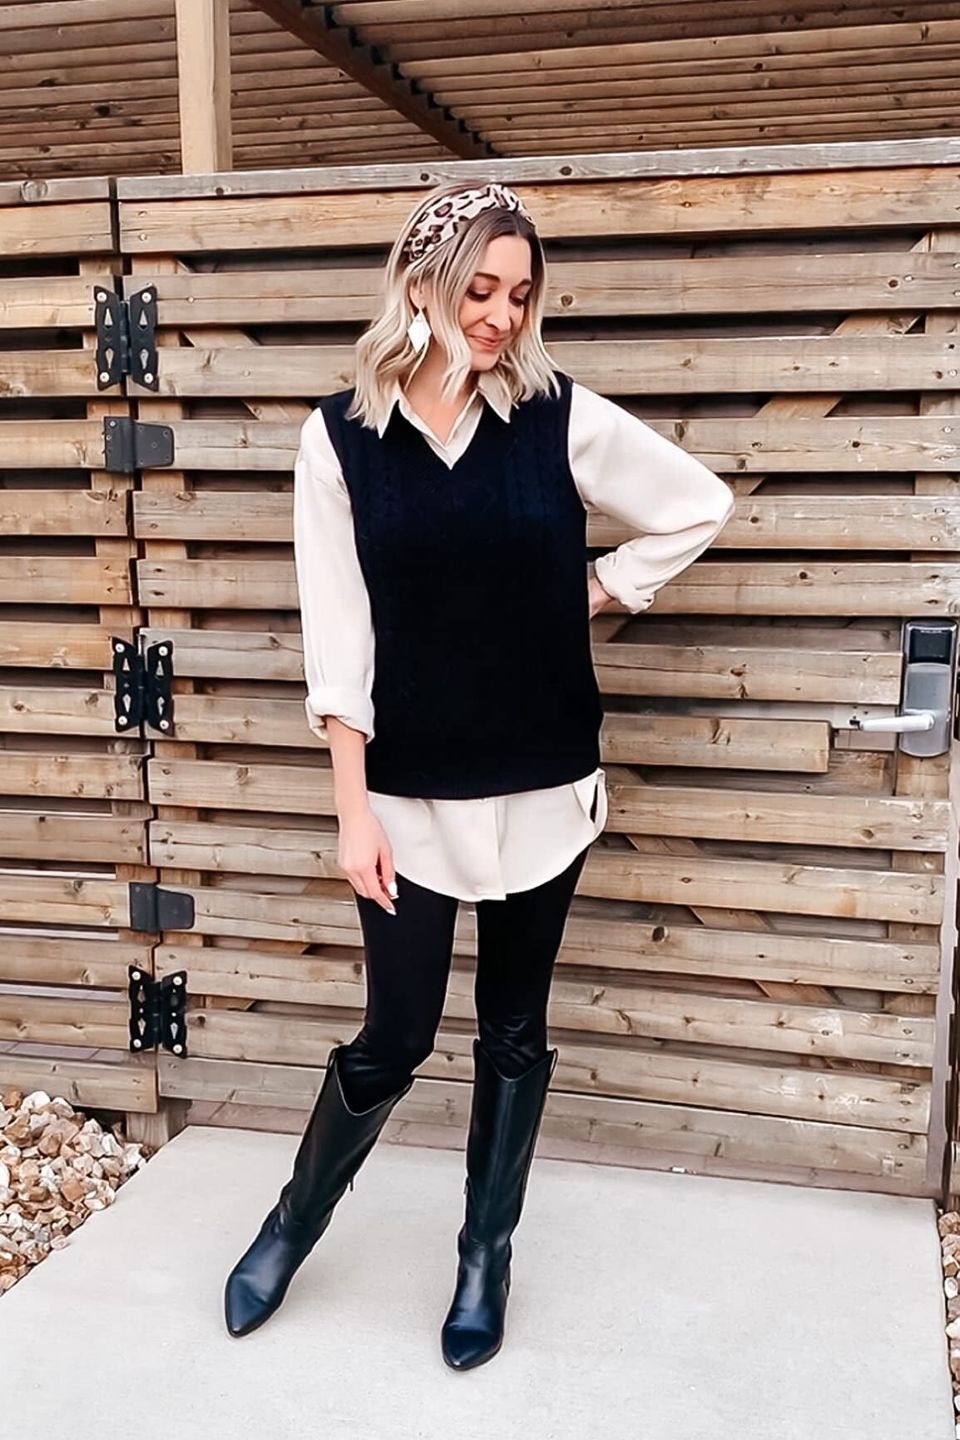 21 Absolutely Stunning Winter Date Night Outfits - Amber Chic Life